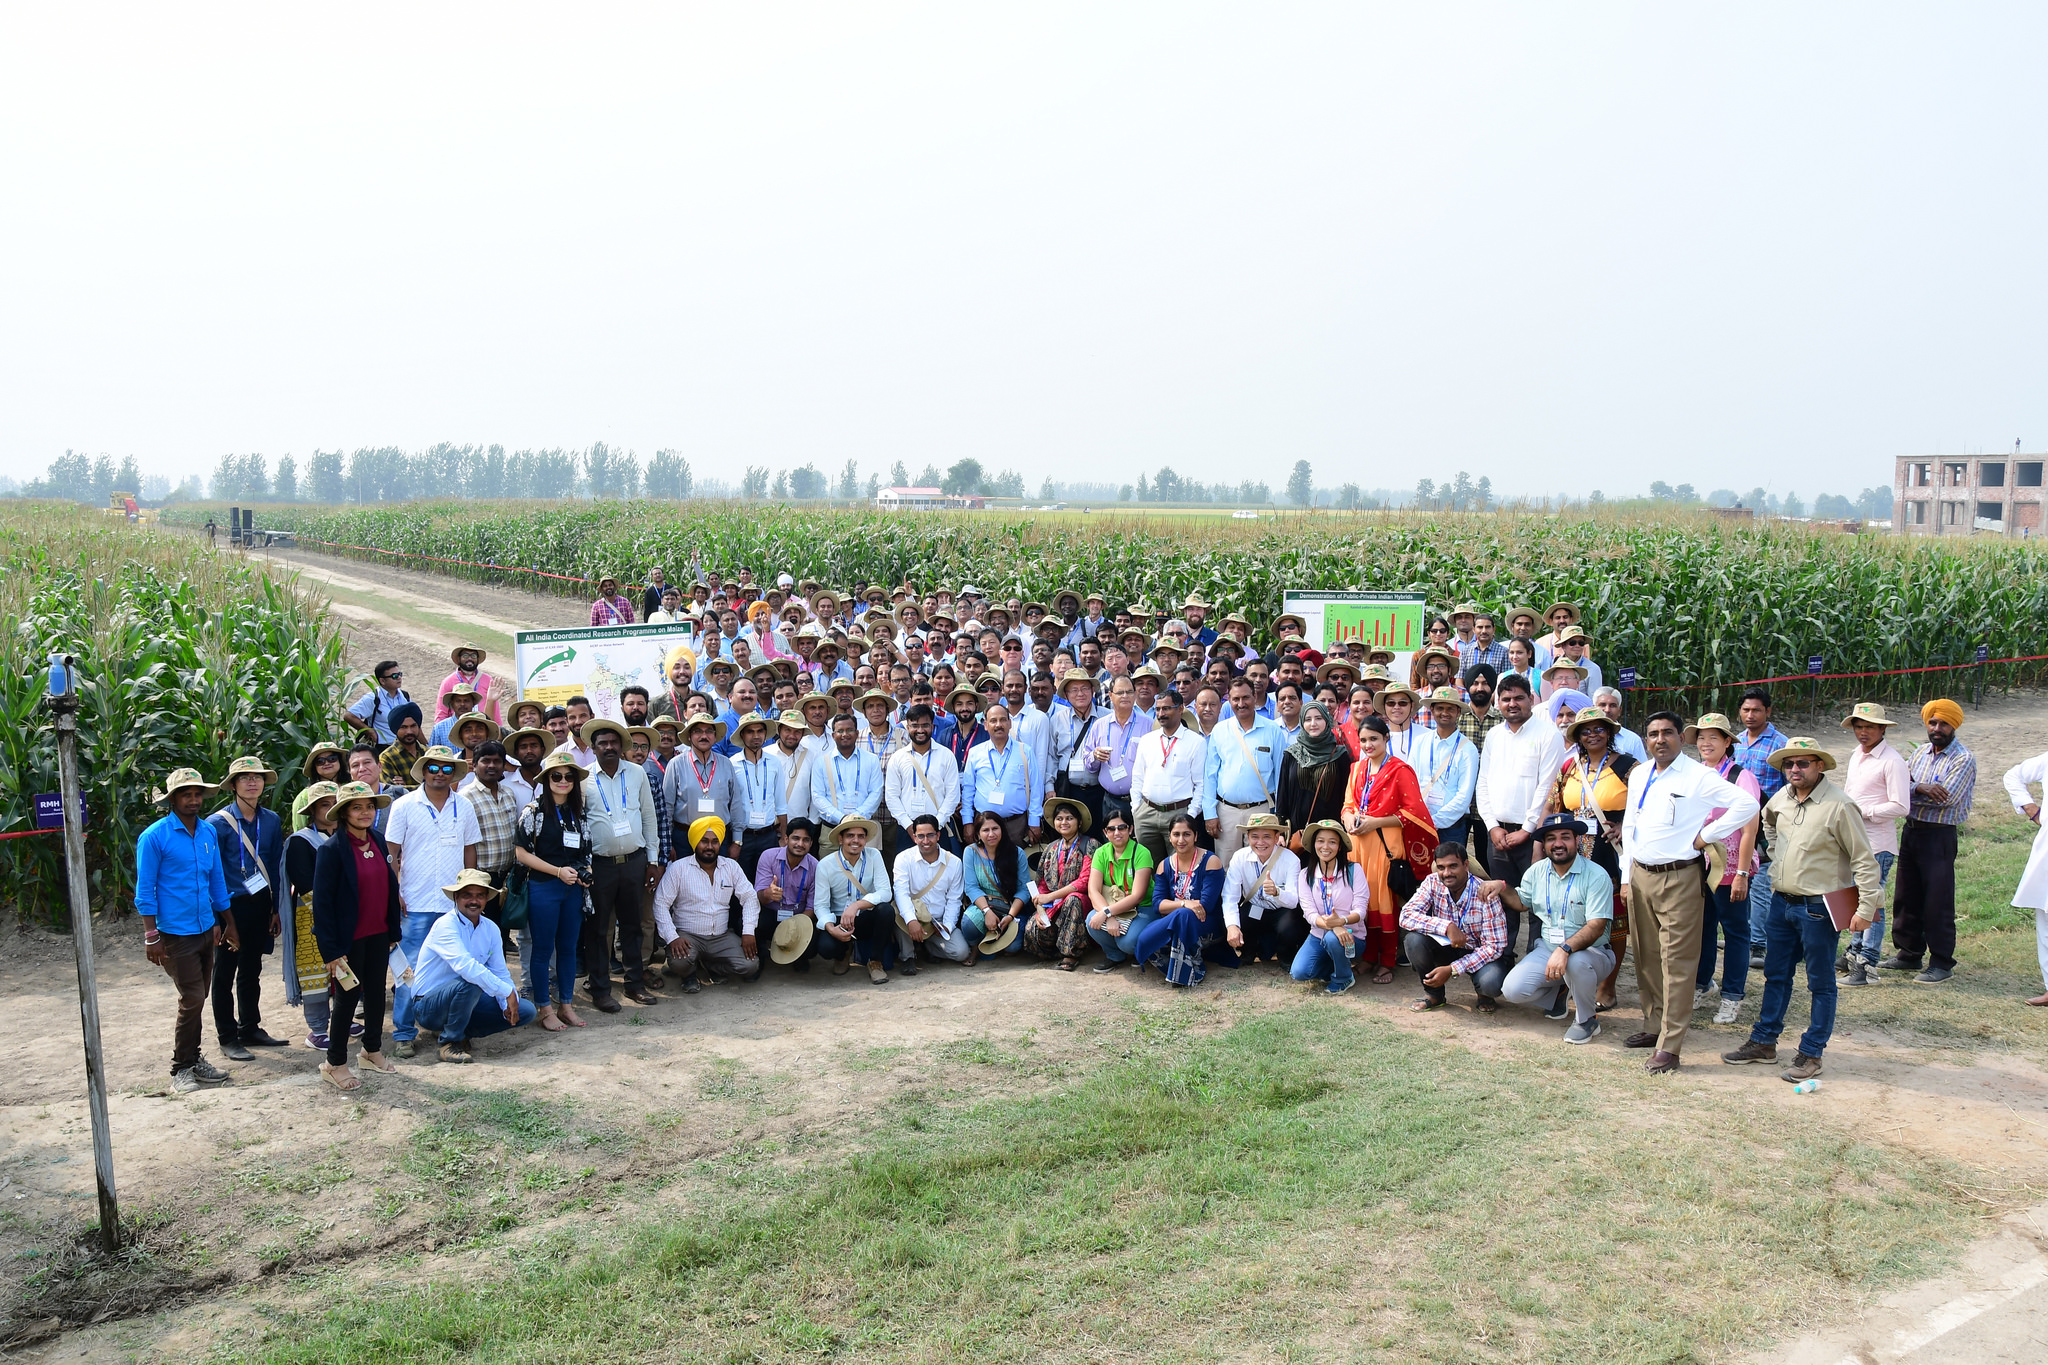 Conference participants pose for a group photo at the field visit site during the 13th Asian Maize Conference. (Photo: Manjit Singh/Punjab Agricultural University)